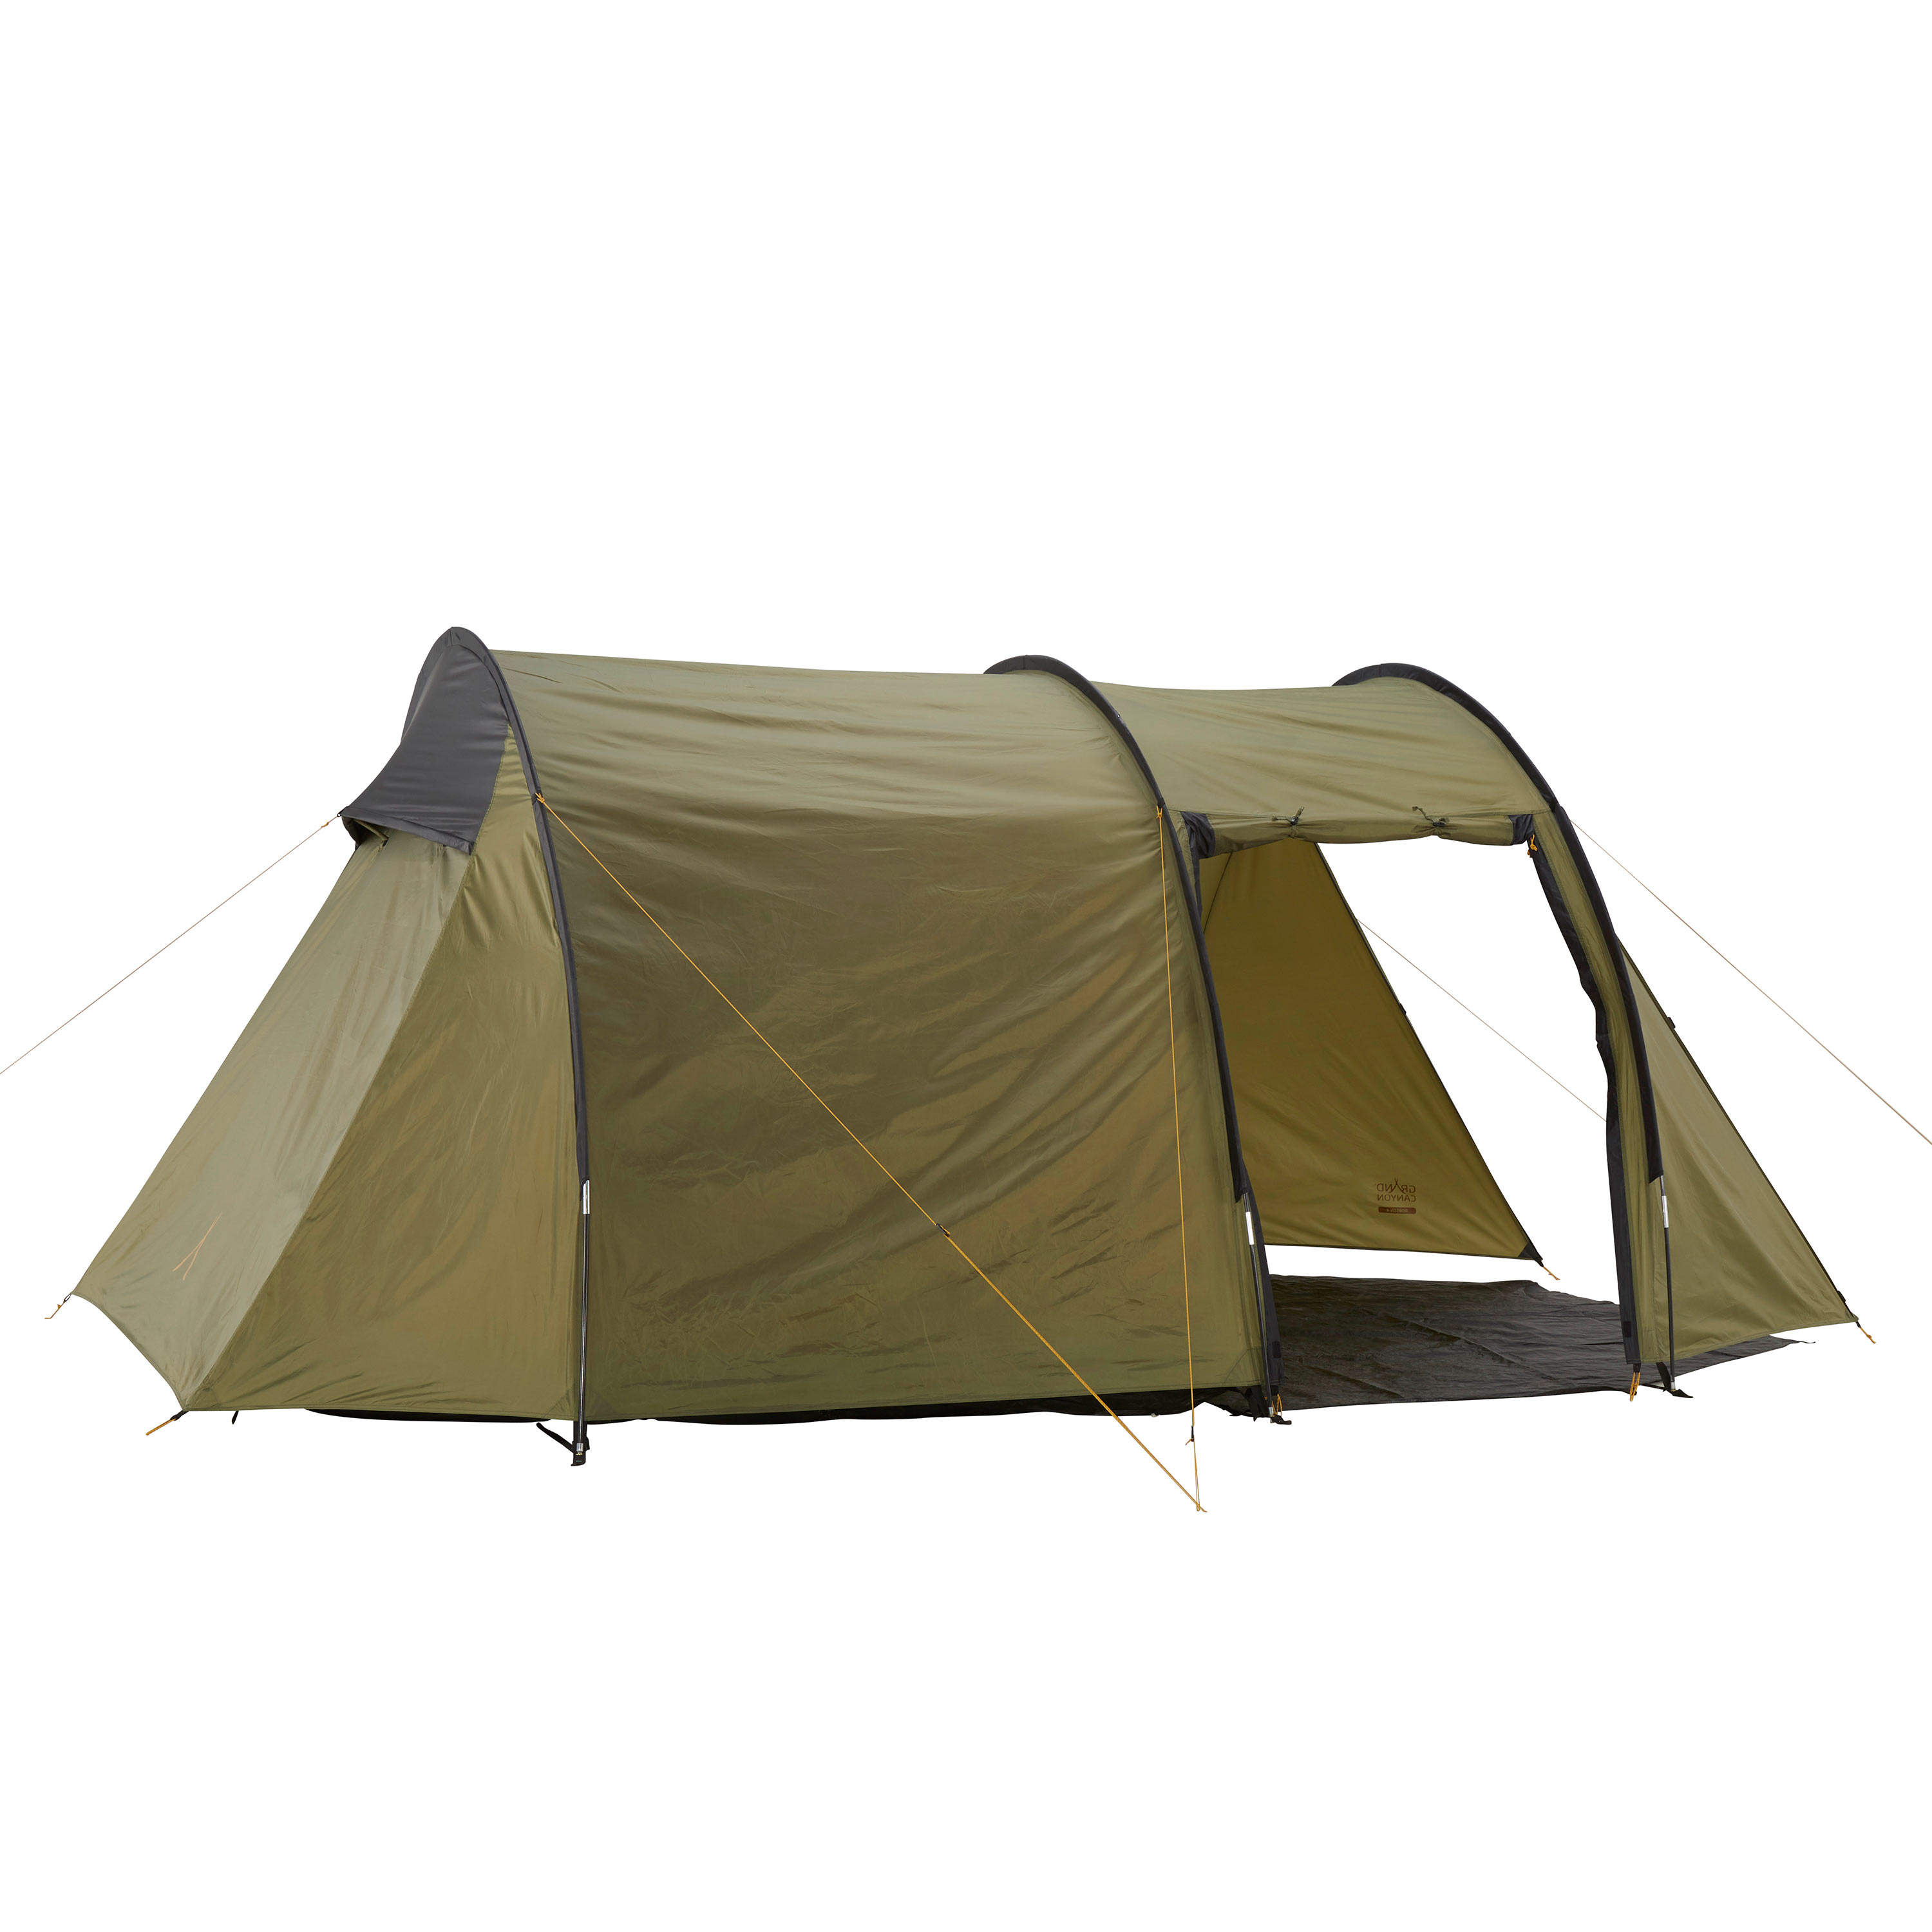 Purchase the Grand Canyon Tent Robson 3 capulet olive by ASMC